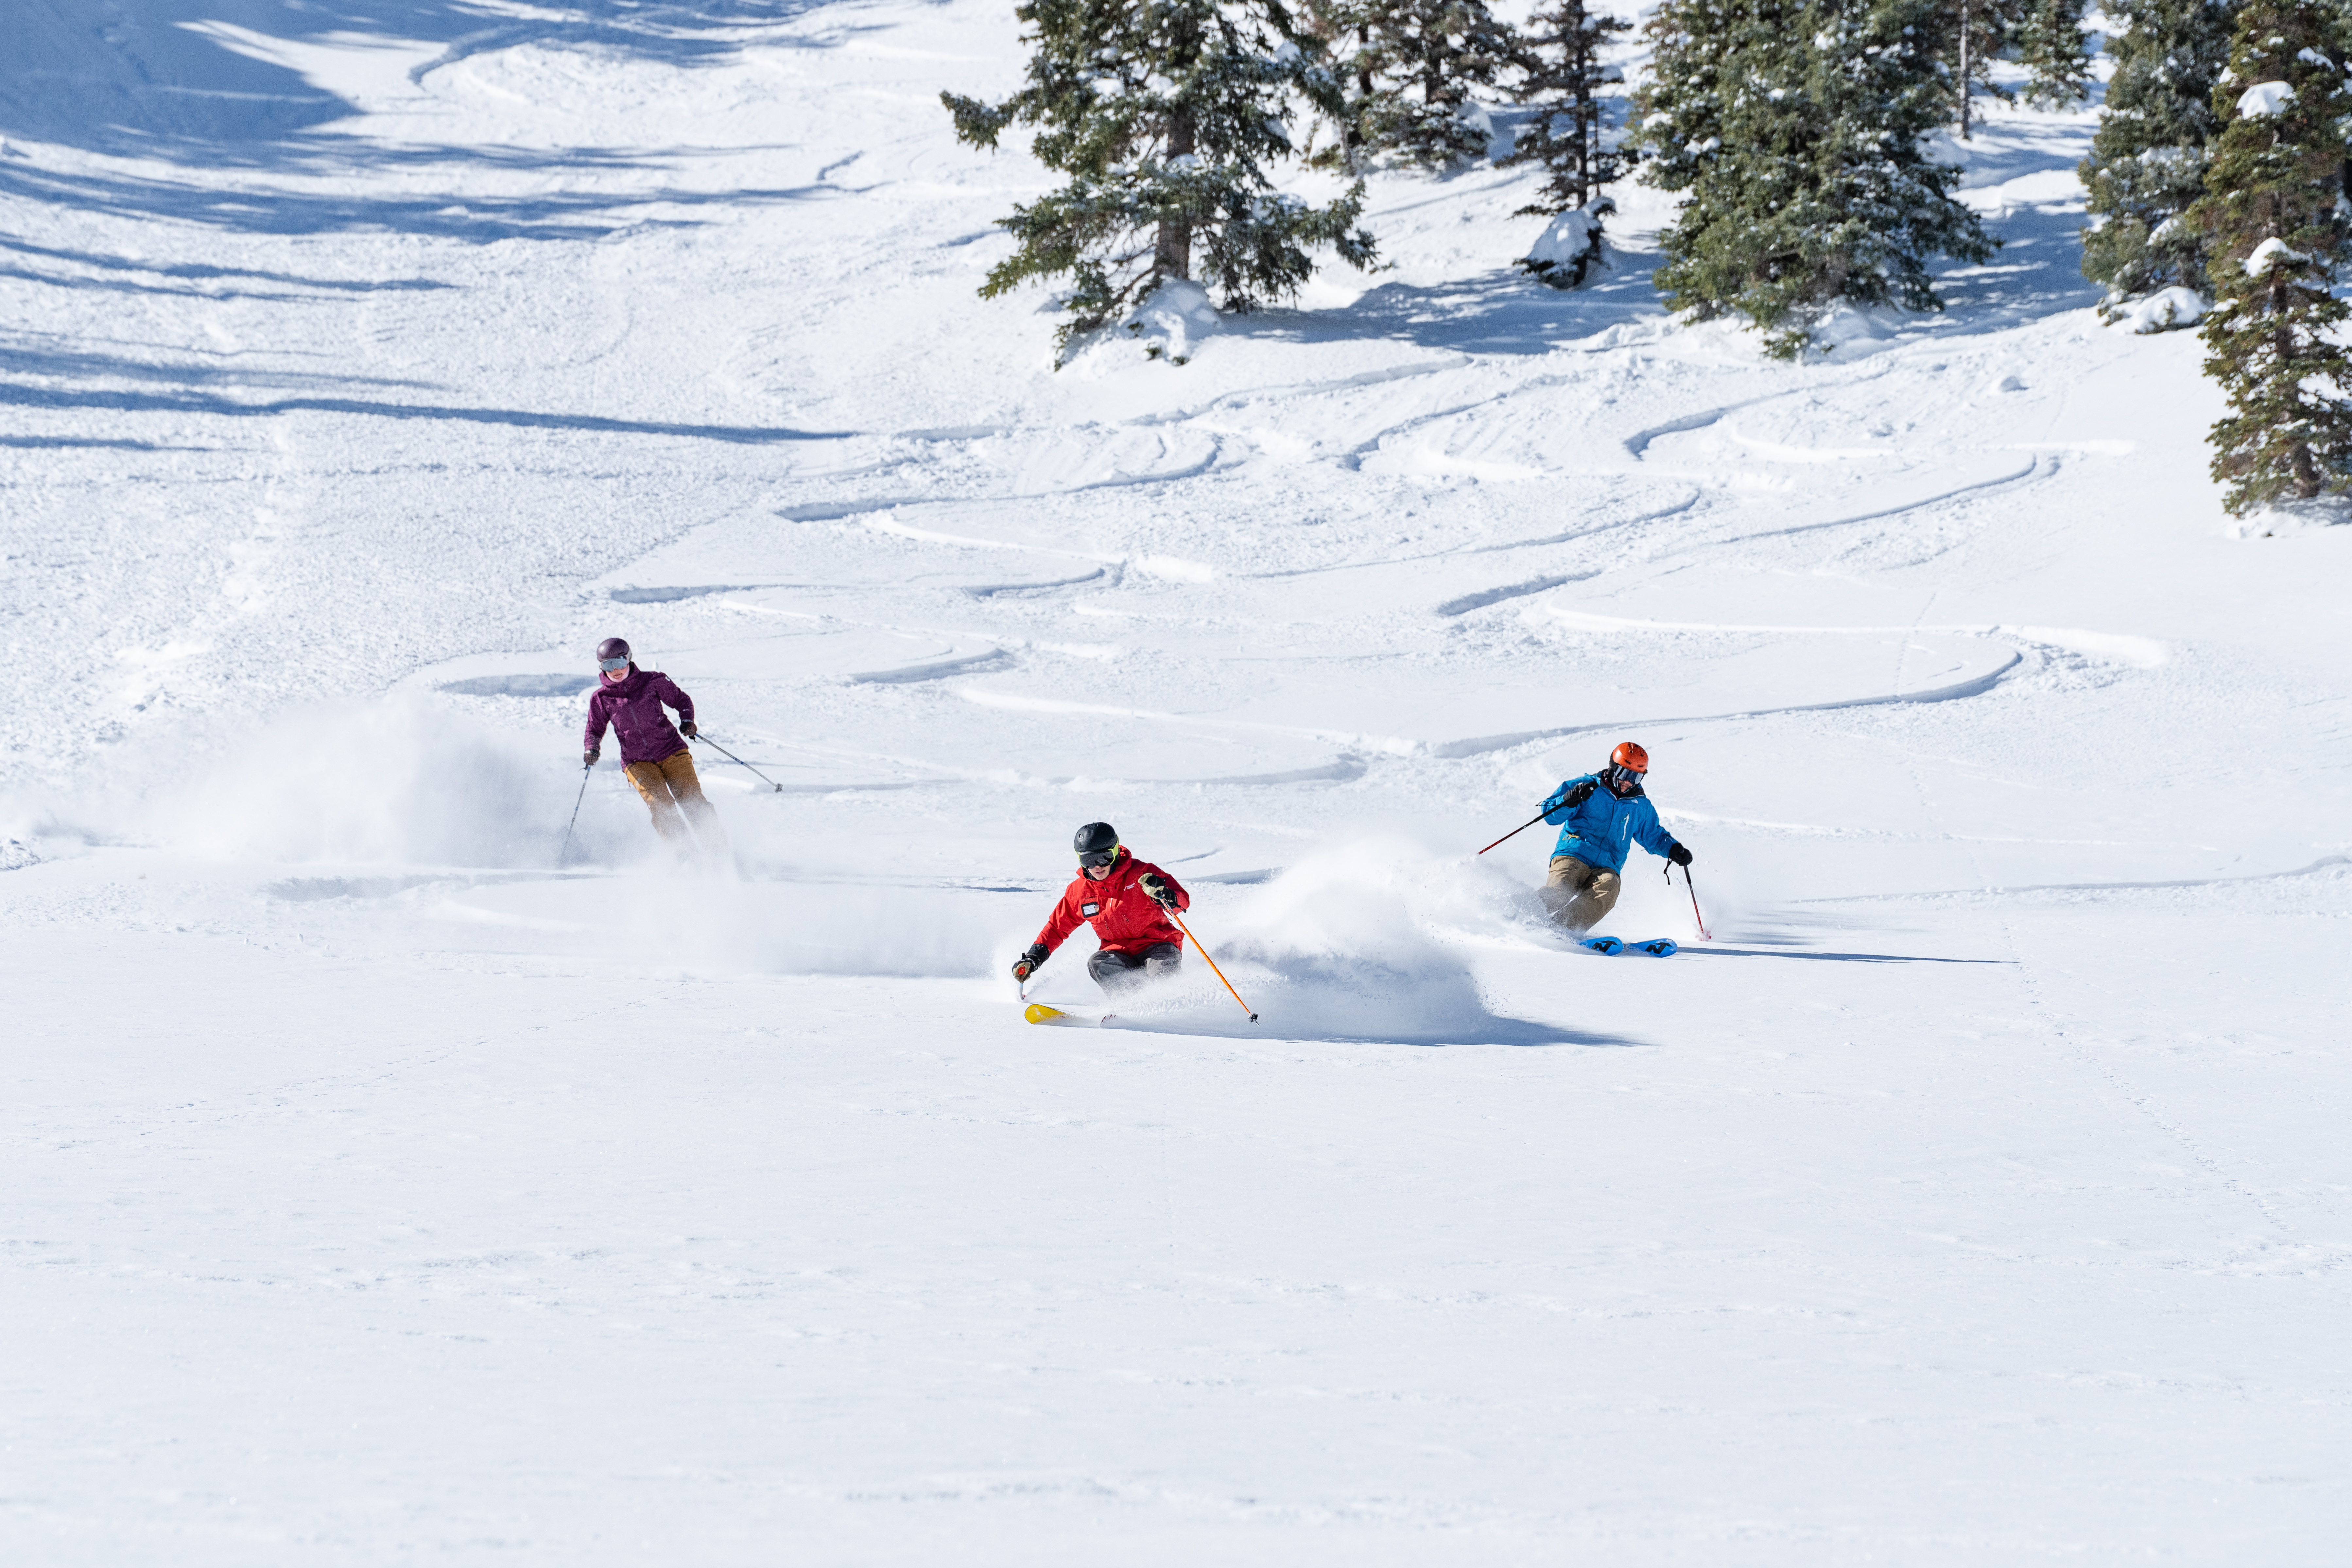 Adult Mountain Experience skiing and snowboarding tours in Salt Lake City, Utah